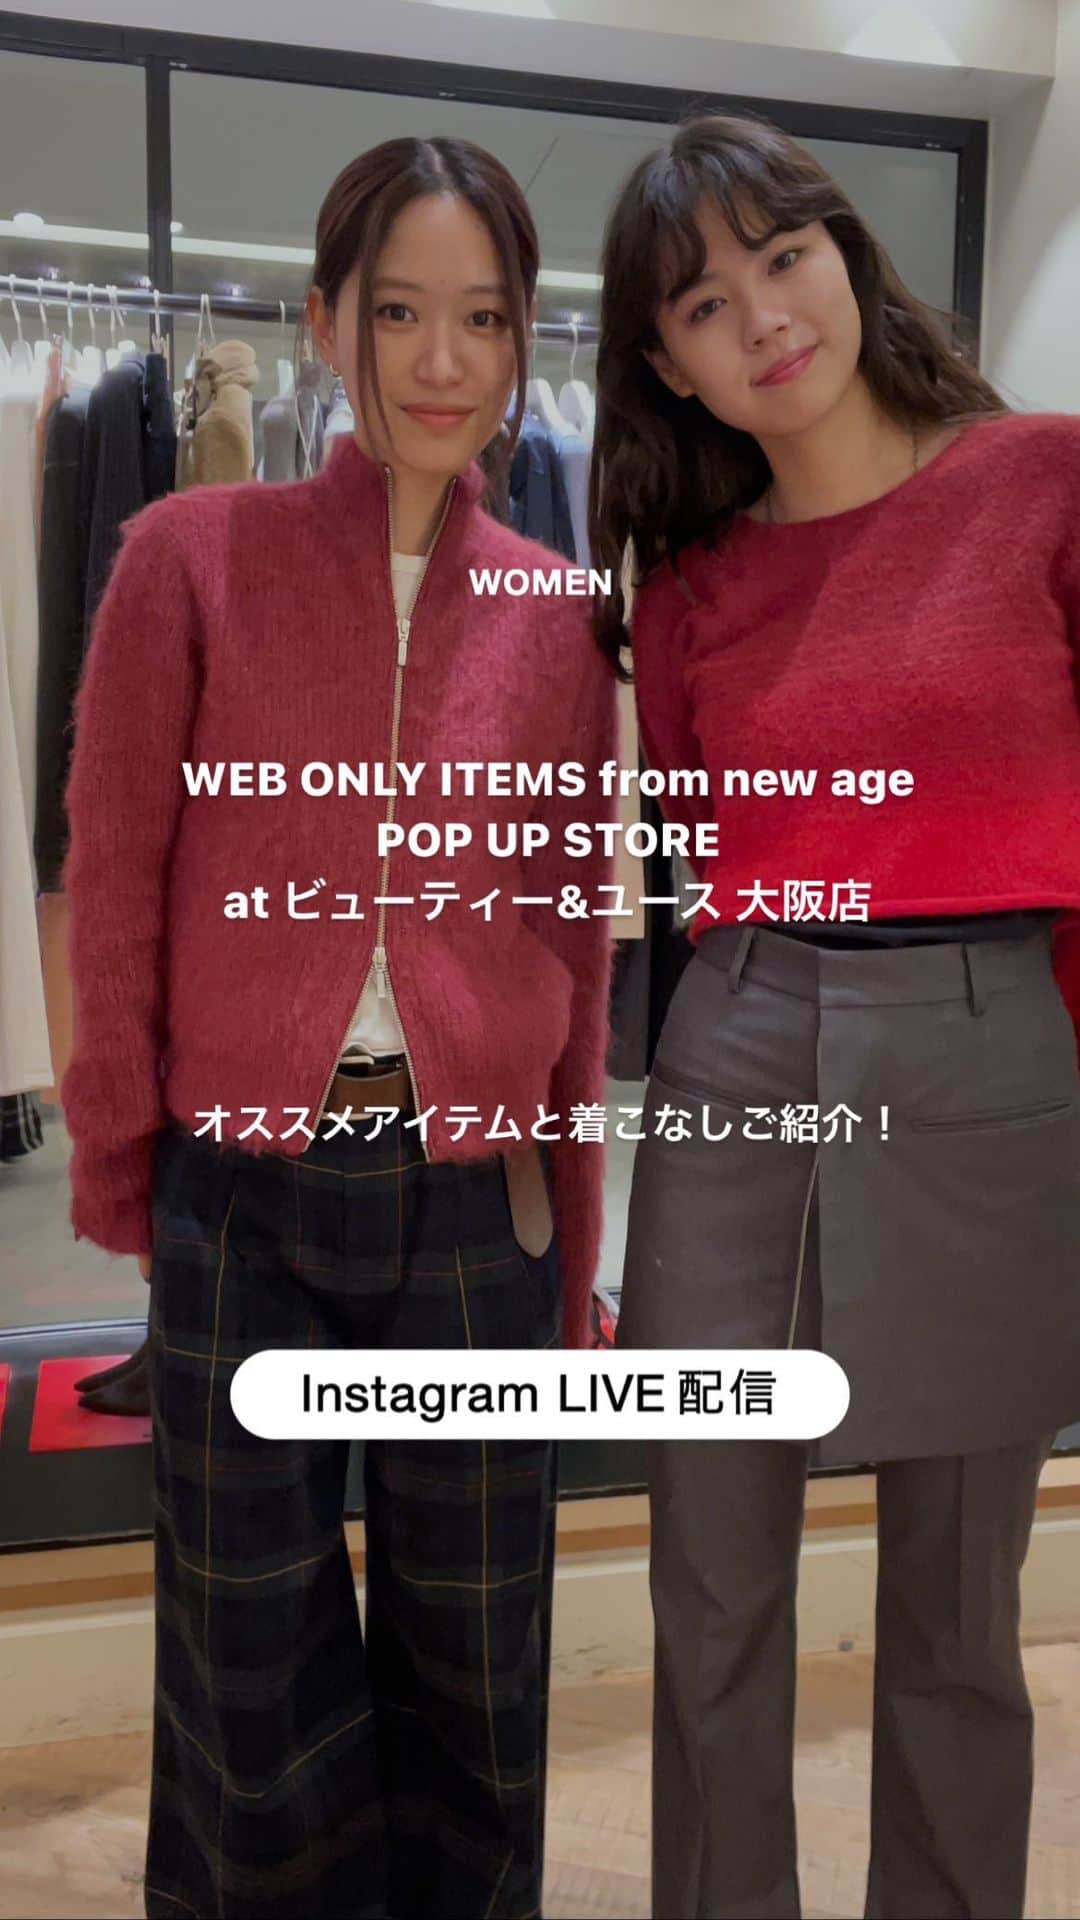 BEAUTY&YOUTH UNITED ARROWSのインスタグラム